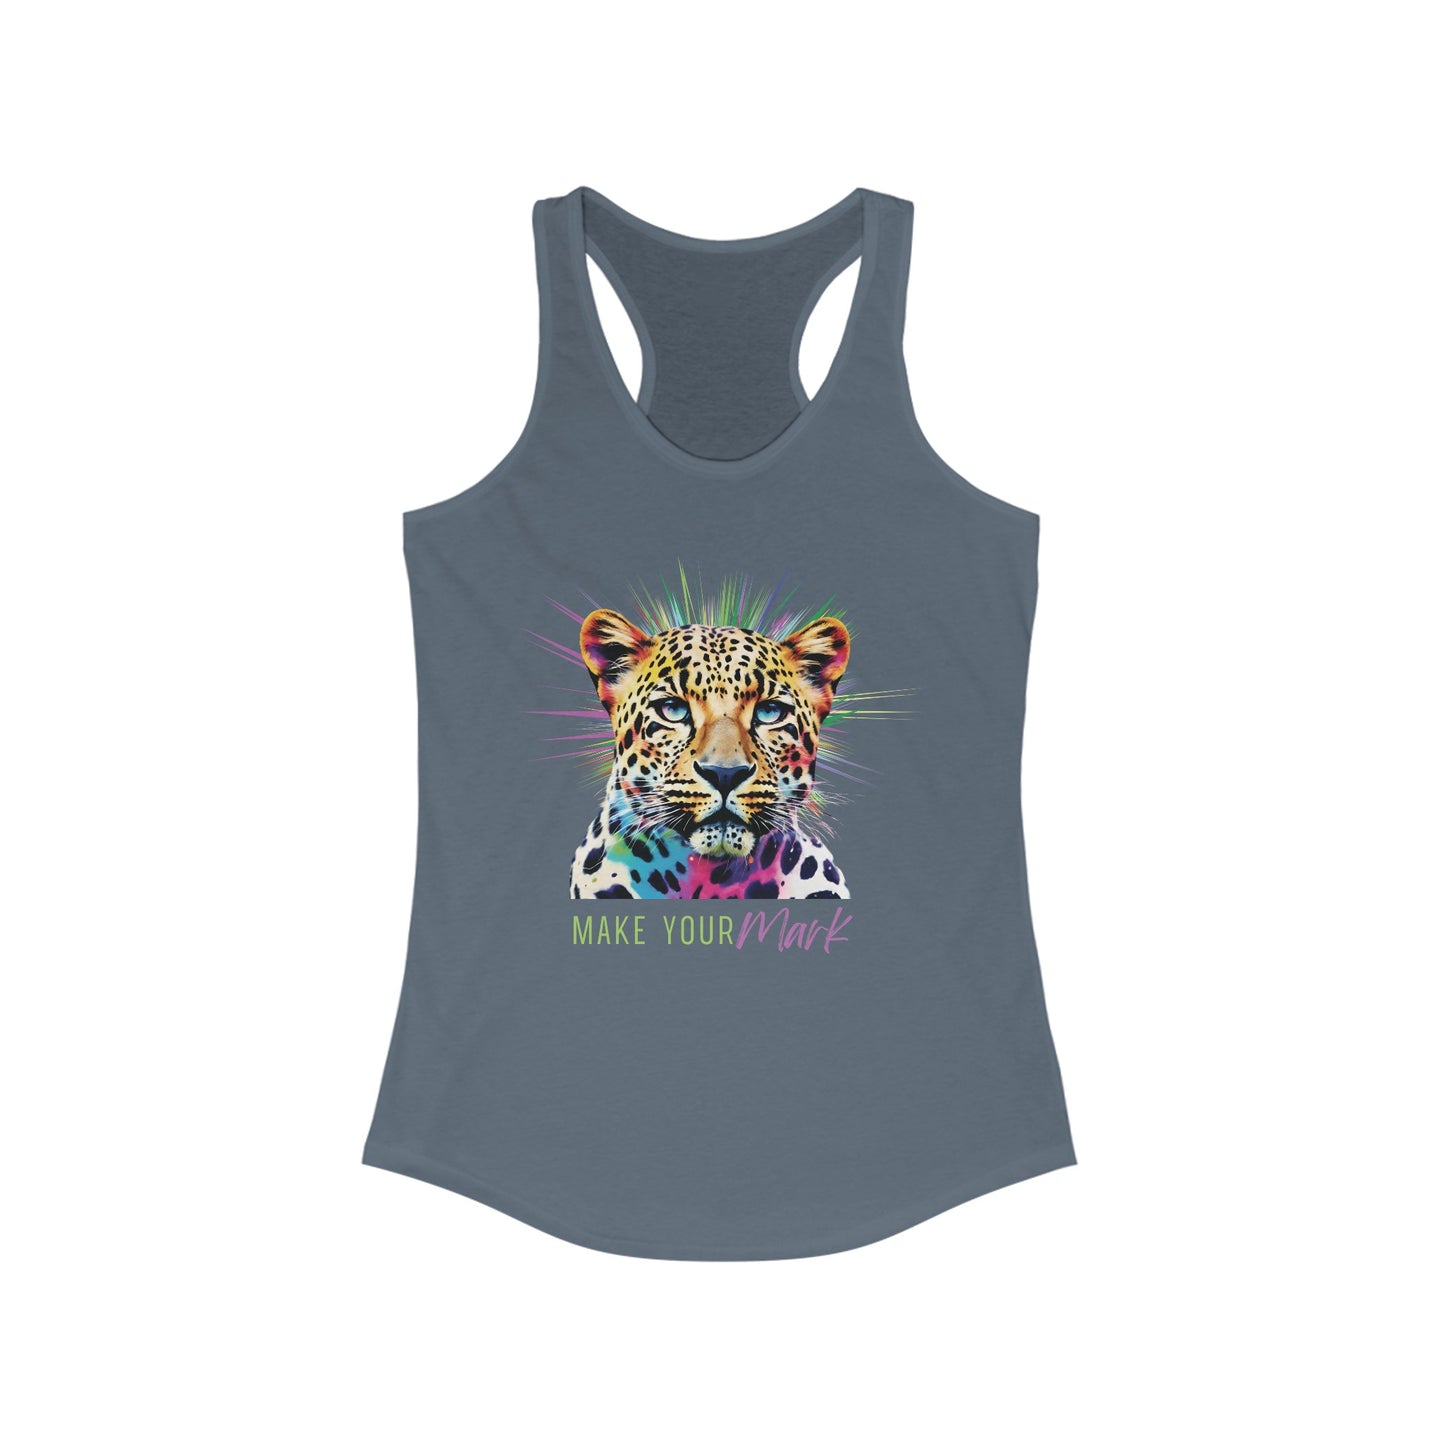 Make your mark Tank Top